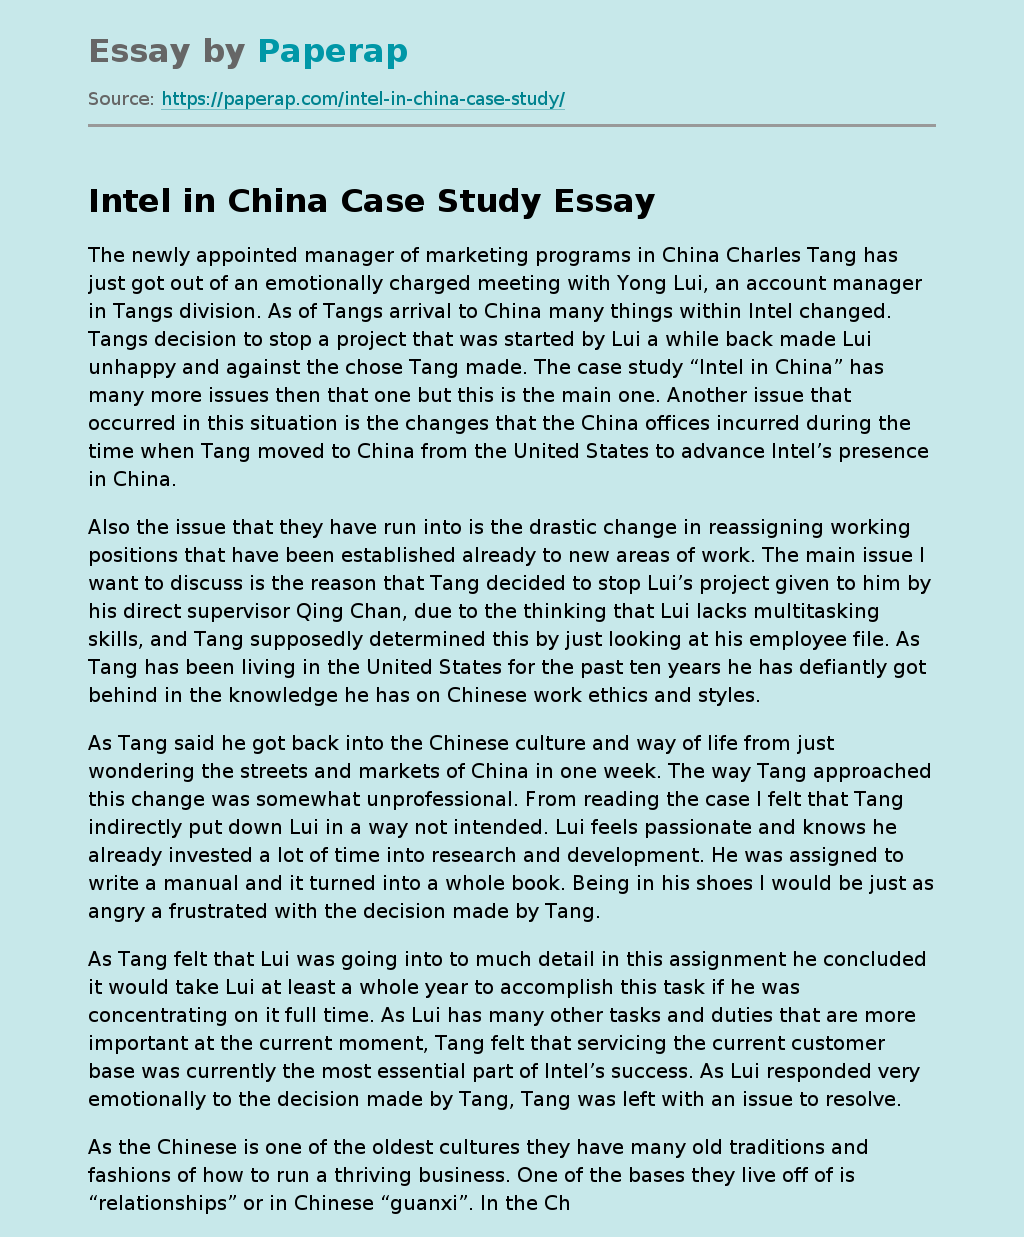 Intel in China Case Study